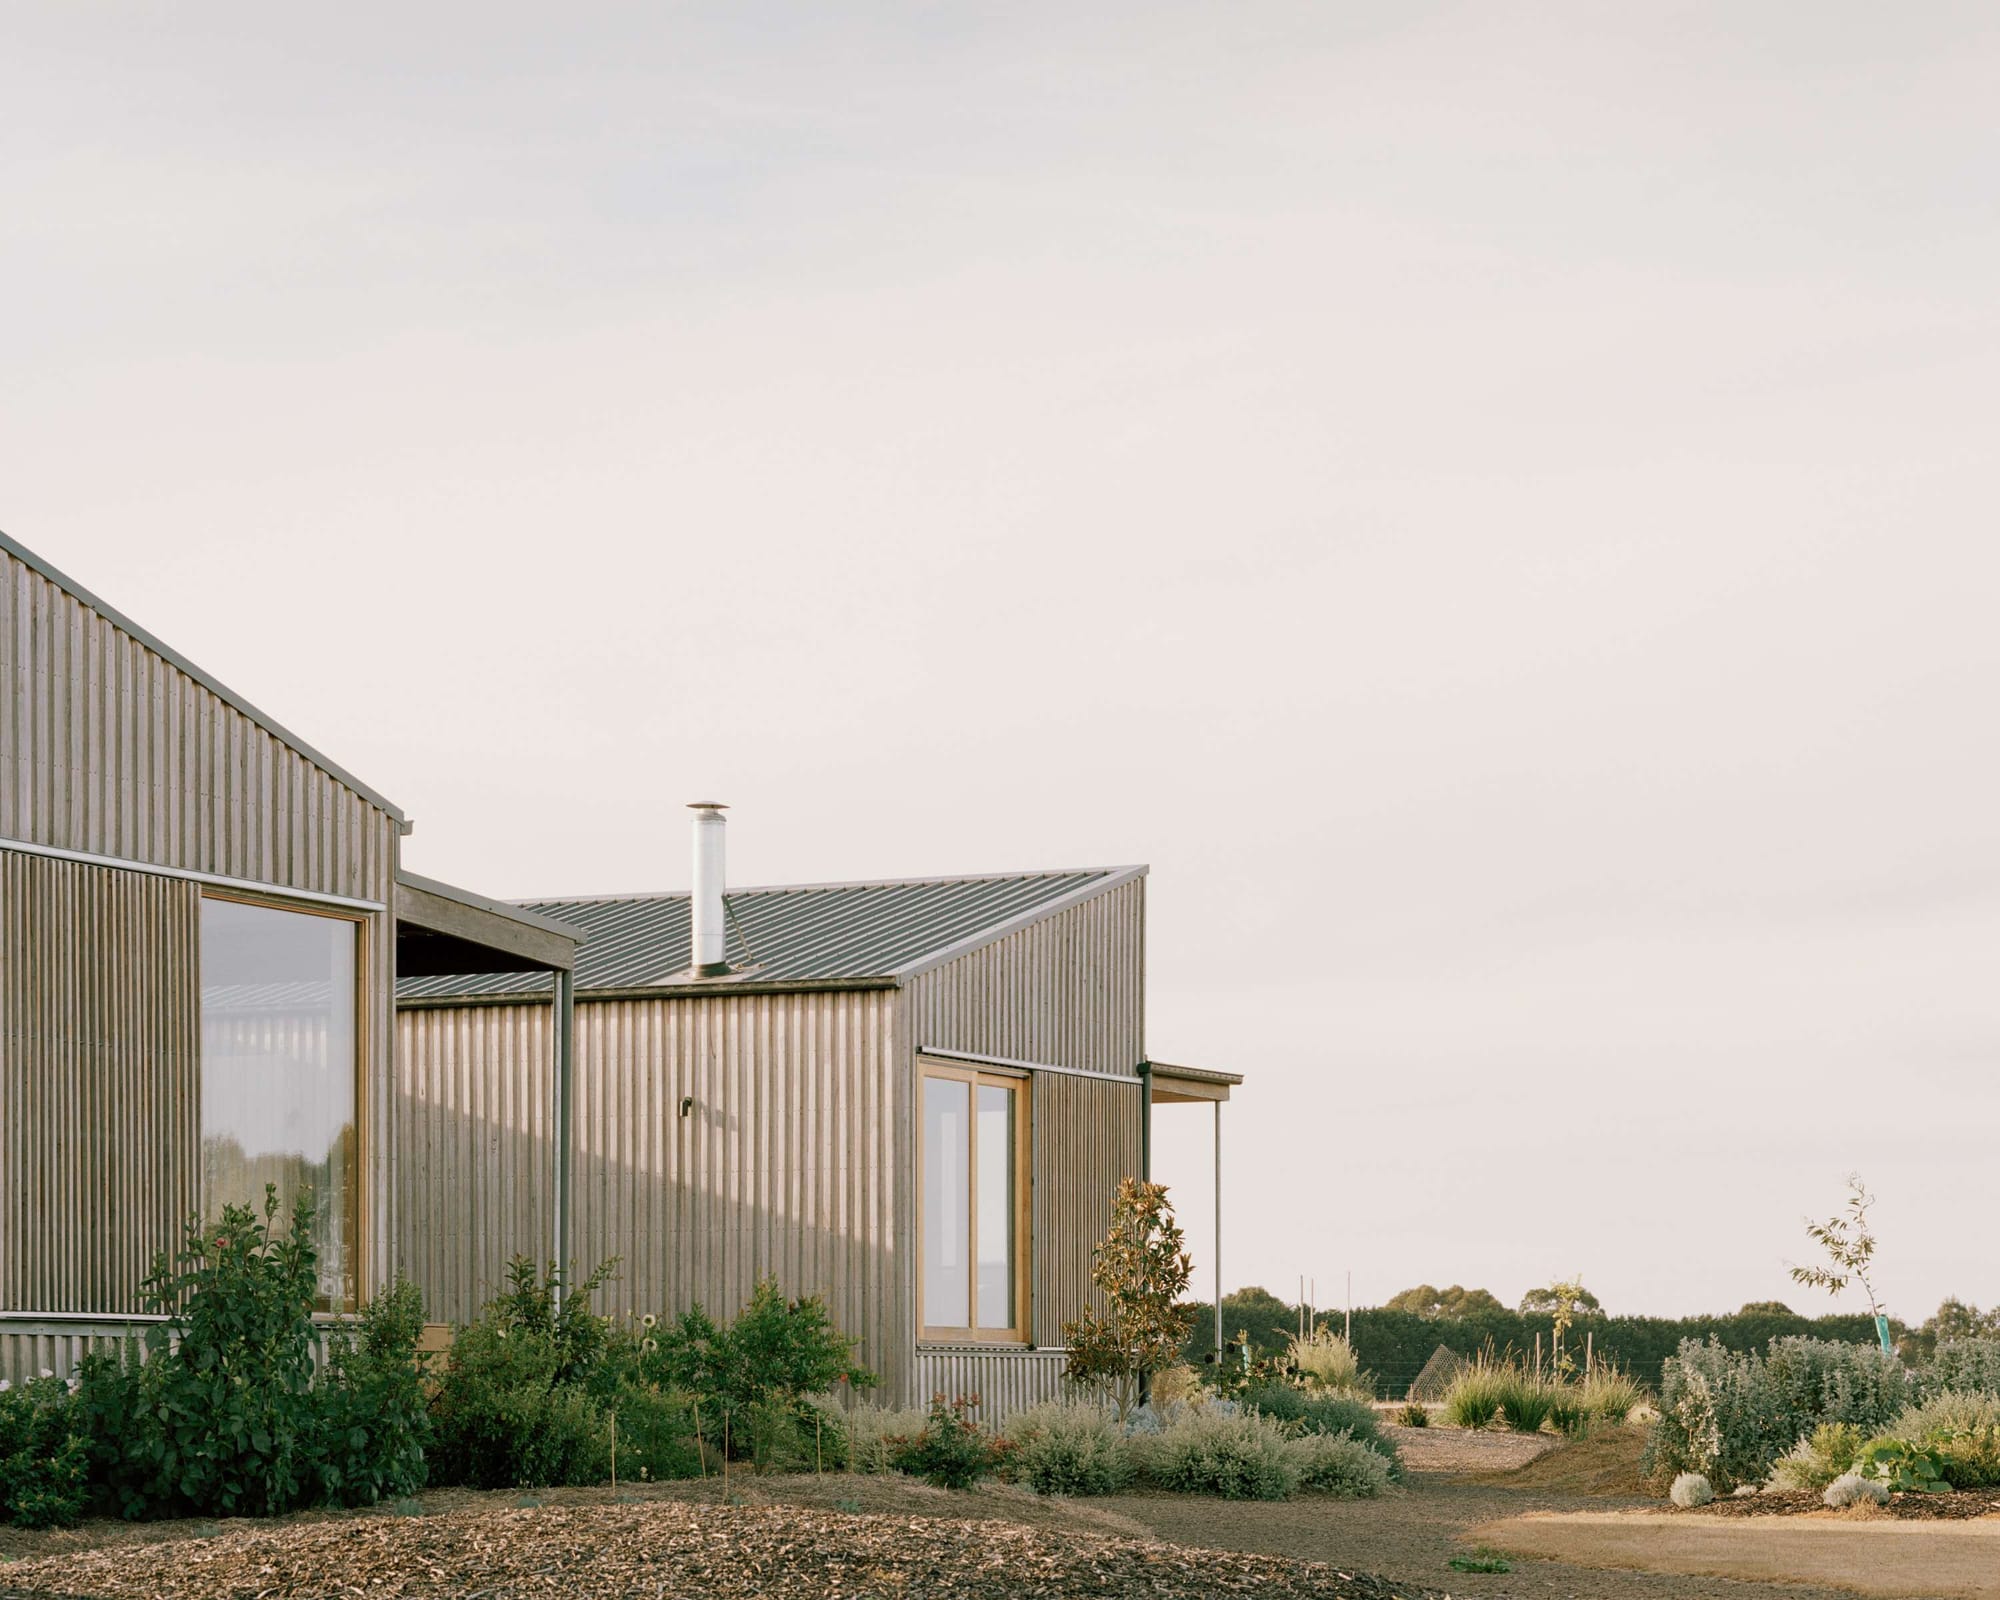 Heather's Off-Grid House by Gardiner Architects. Photography by Rory Gardiner. Facade of timber clad farmhouse surrounded by dry and barren paddock with scattered garden beds and native plants. 